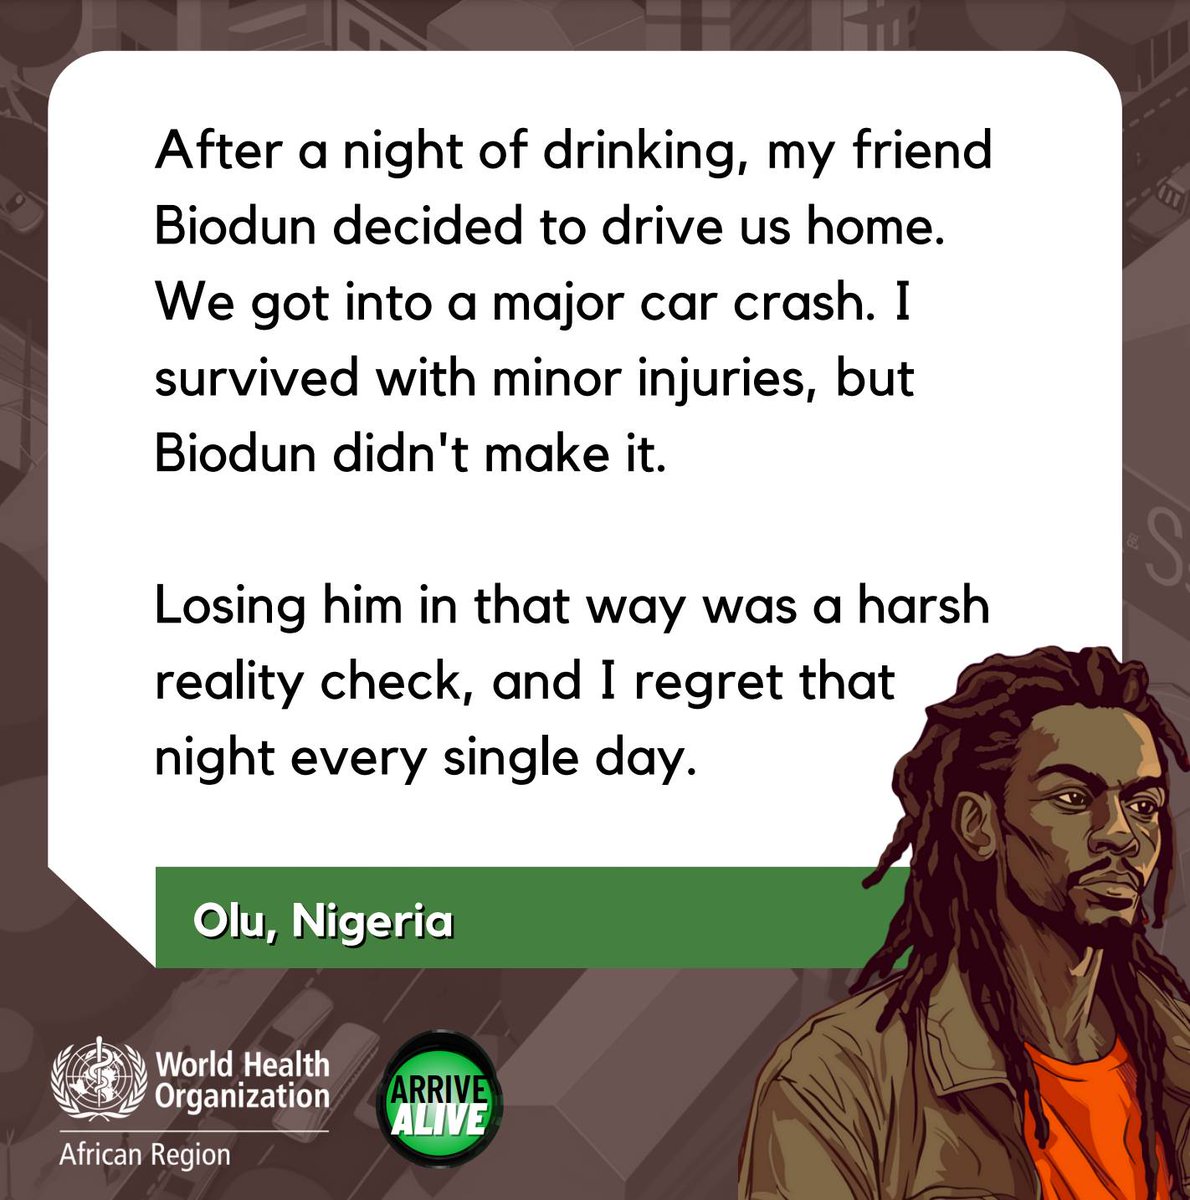 It's Friday—remember this: Drink-drivers are 17 times more likely to die in road accidents than non-drinkers.

Choose to #ArriveAlive.

Do not drink and drive.

Find out more ➡️ afro.who.int/ArriveAlive